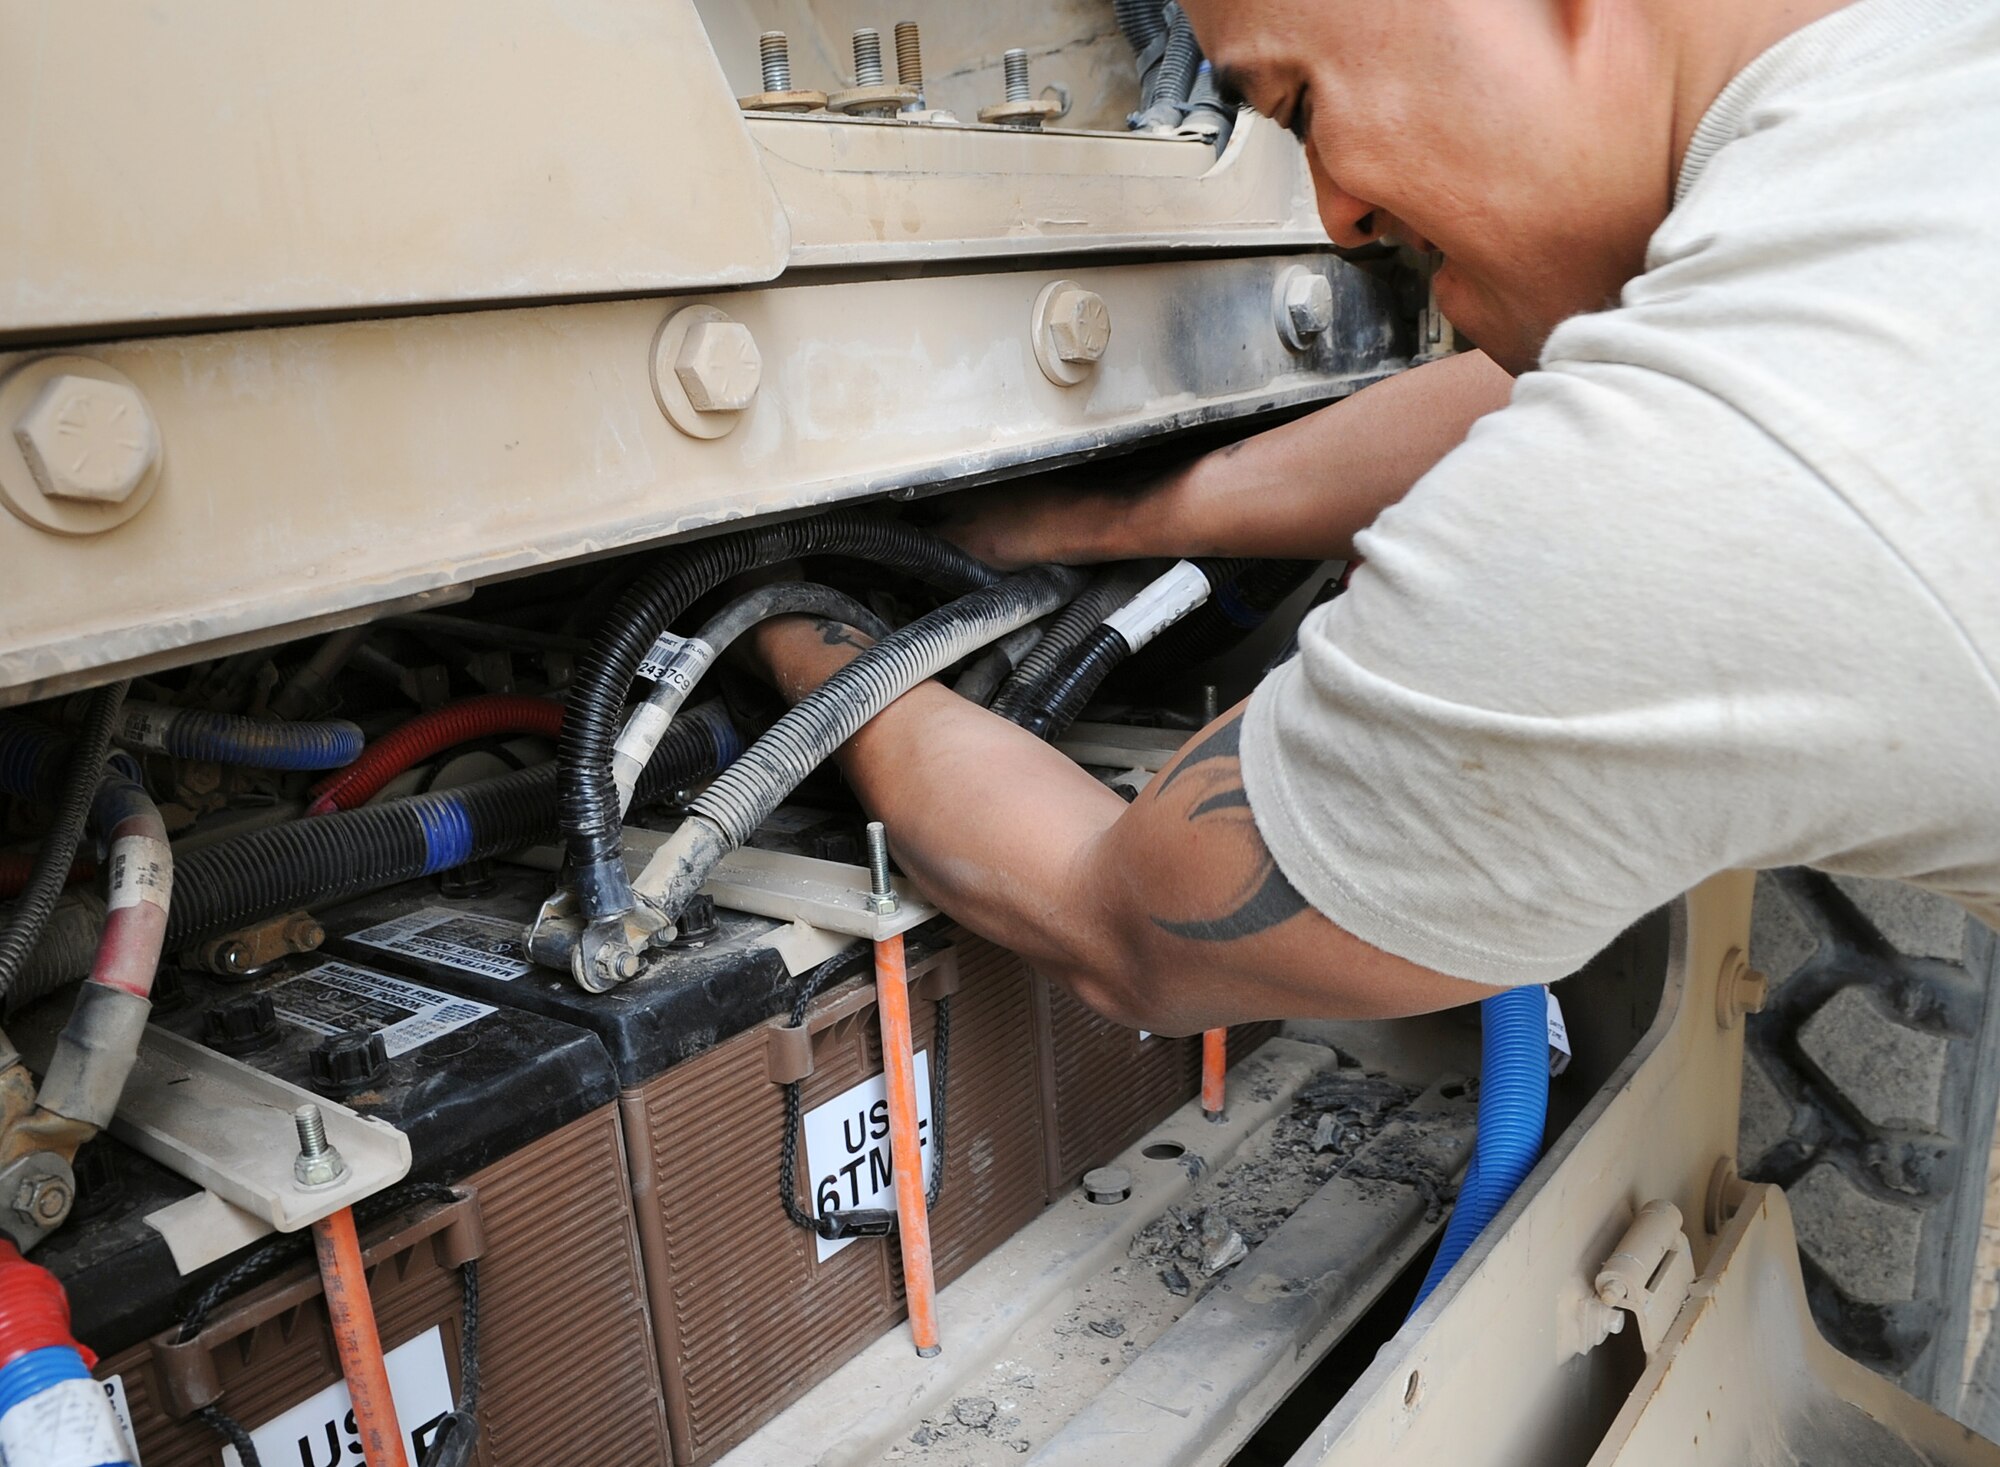 KIRKUK REGIONAL AIR BASE, Iraq –SrA Francisco Macatol, 506th Expeditionary Logistics Readiness Squadron vehicle maintainer, works on a Mine-Resistant Ambush-Protected Vehicle Feb. 12, 2010.  Airmen Macatol is upgrading the MRAP by installing a retro-kit for battery box. The vehicle maintenance shop has a hand in repairing just about any mission essential vehicle on base, including HMMWVs, forklifts, cargo loaders, dodge pickups, ambulances and fire trucks.  (U.S. Air Force photo/Staff Sgt. Tabitha Kuykendall)	    